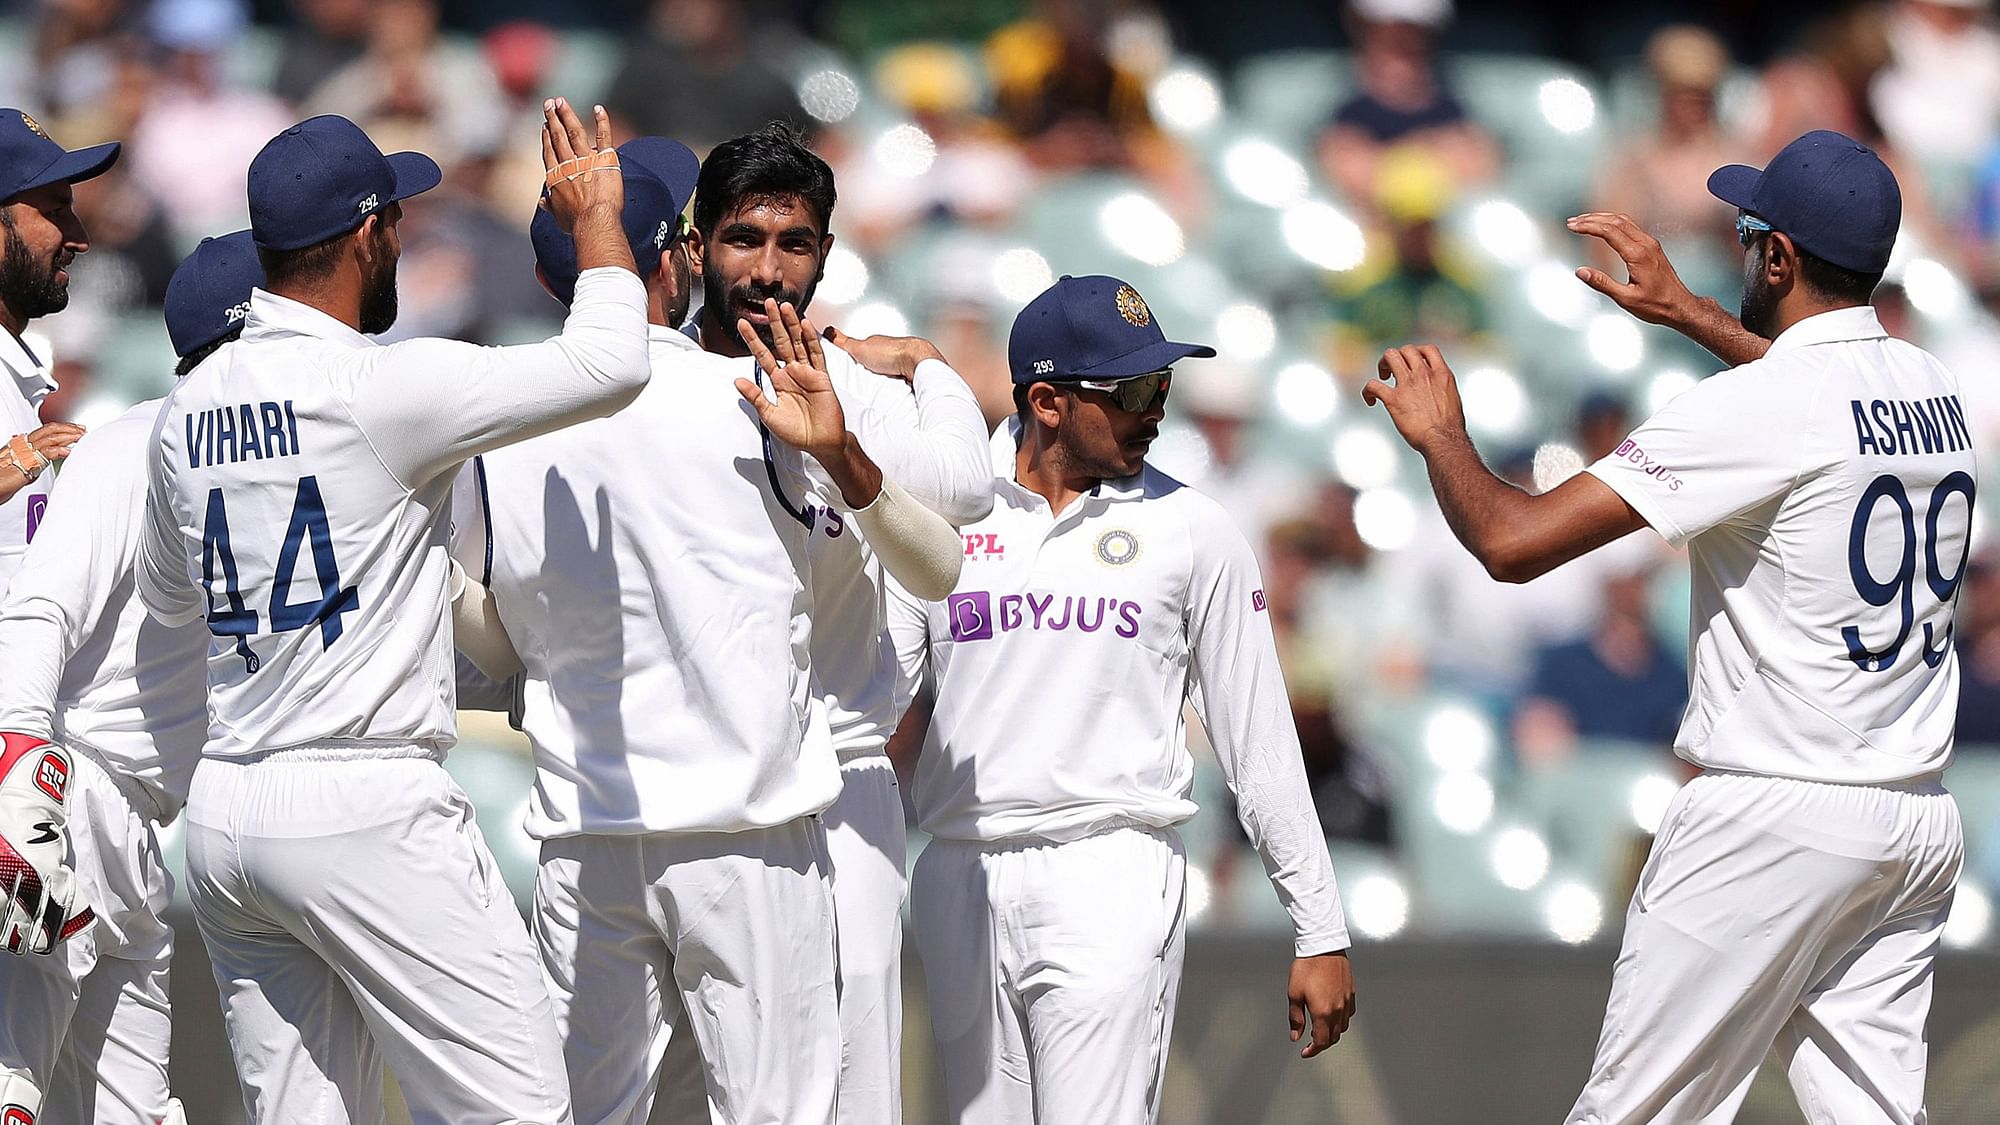 Jasprit Bumrah sent back both Aussie openers, reducing the hosts to 16/1 in 14.1 overs.